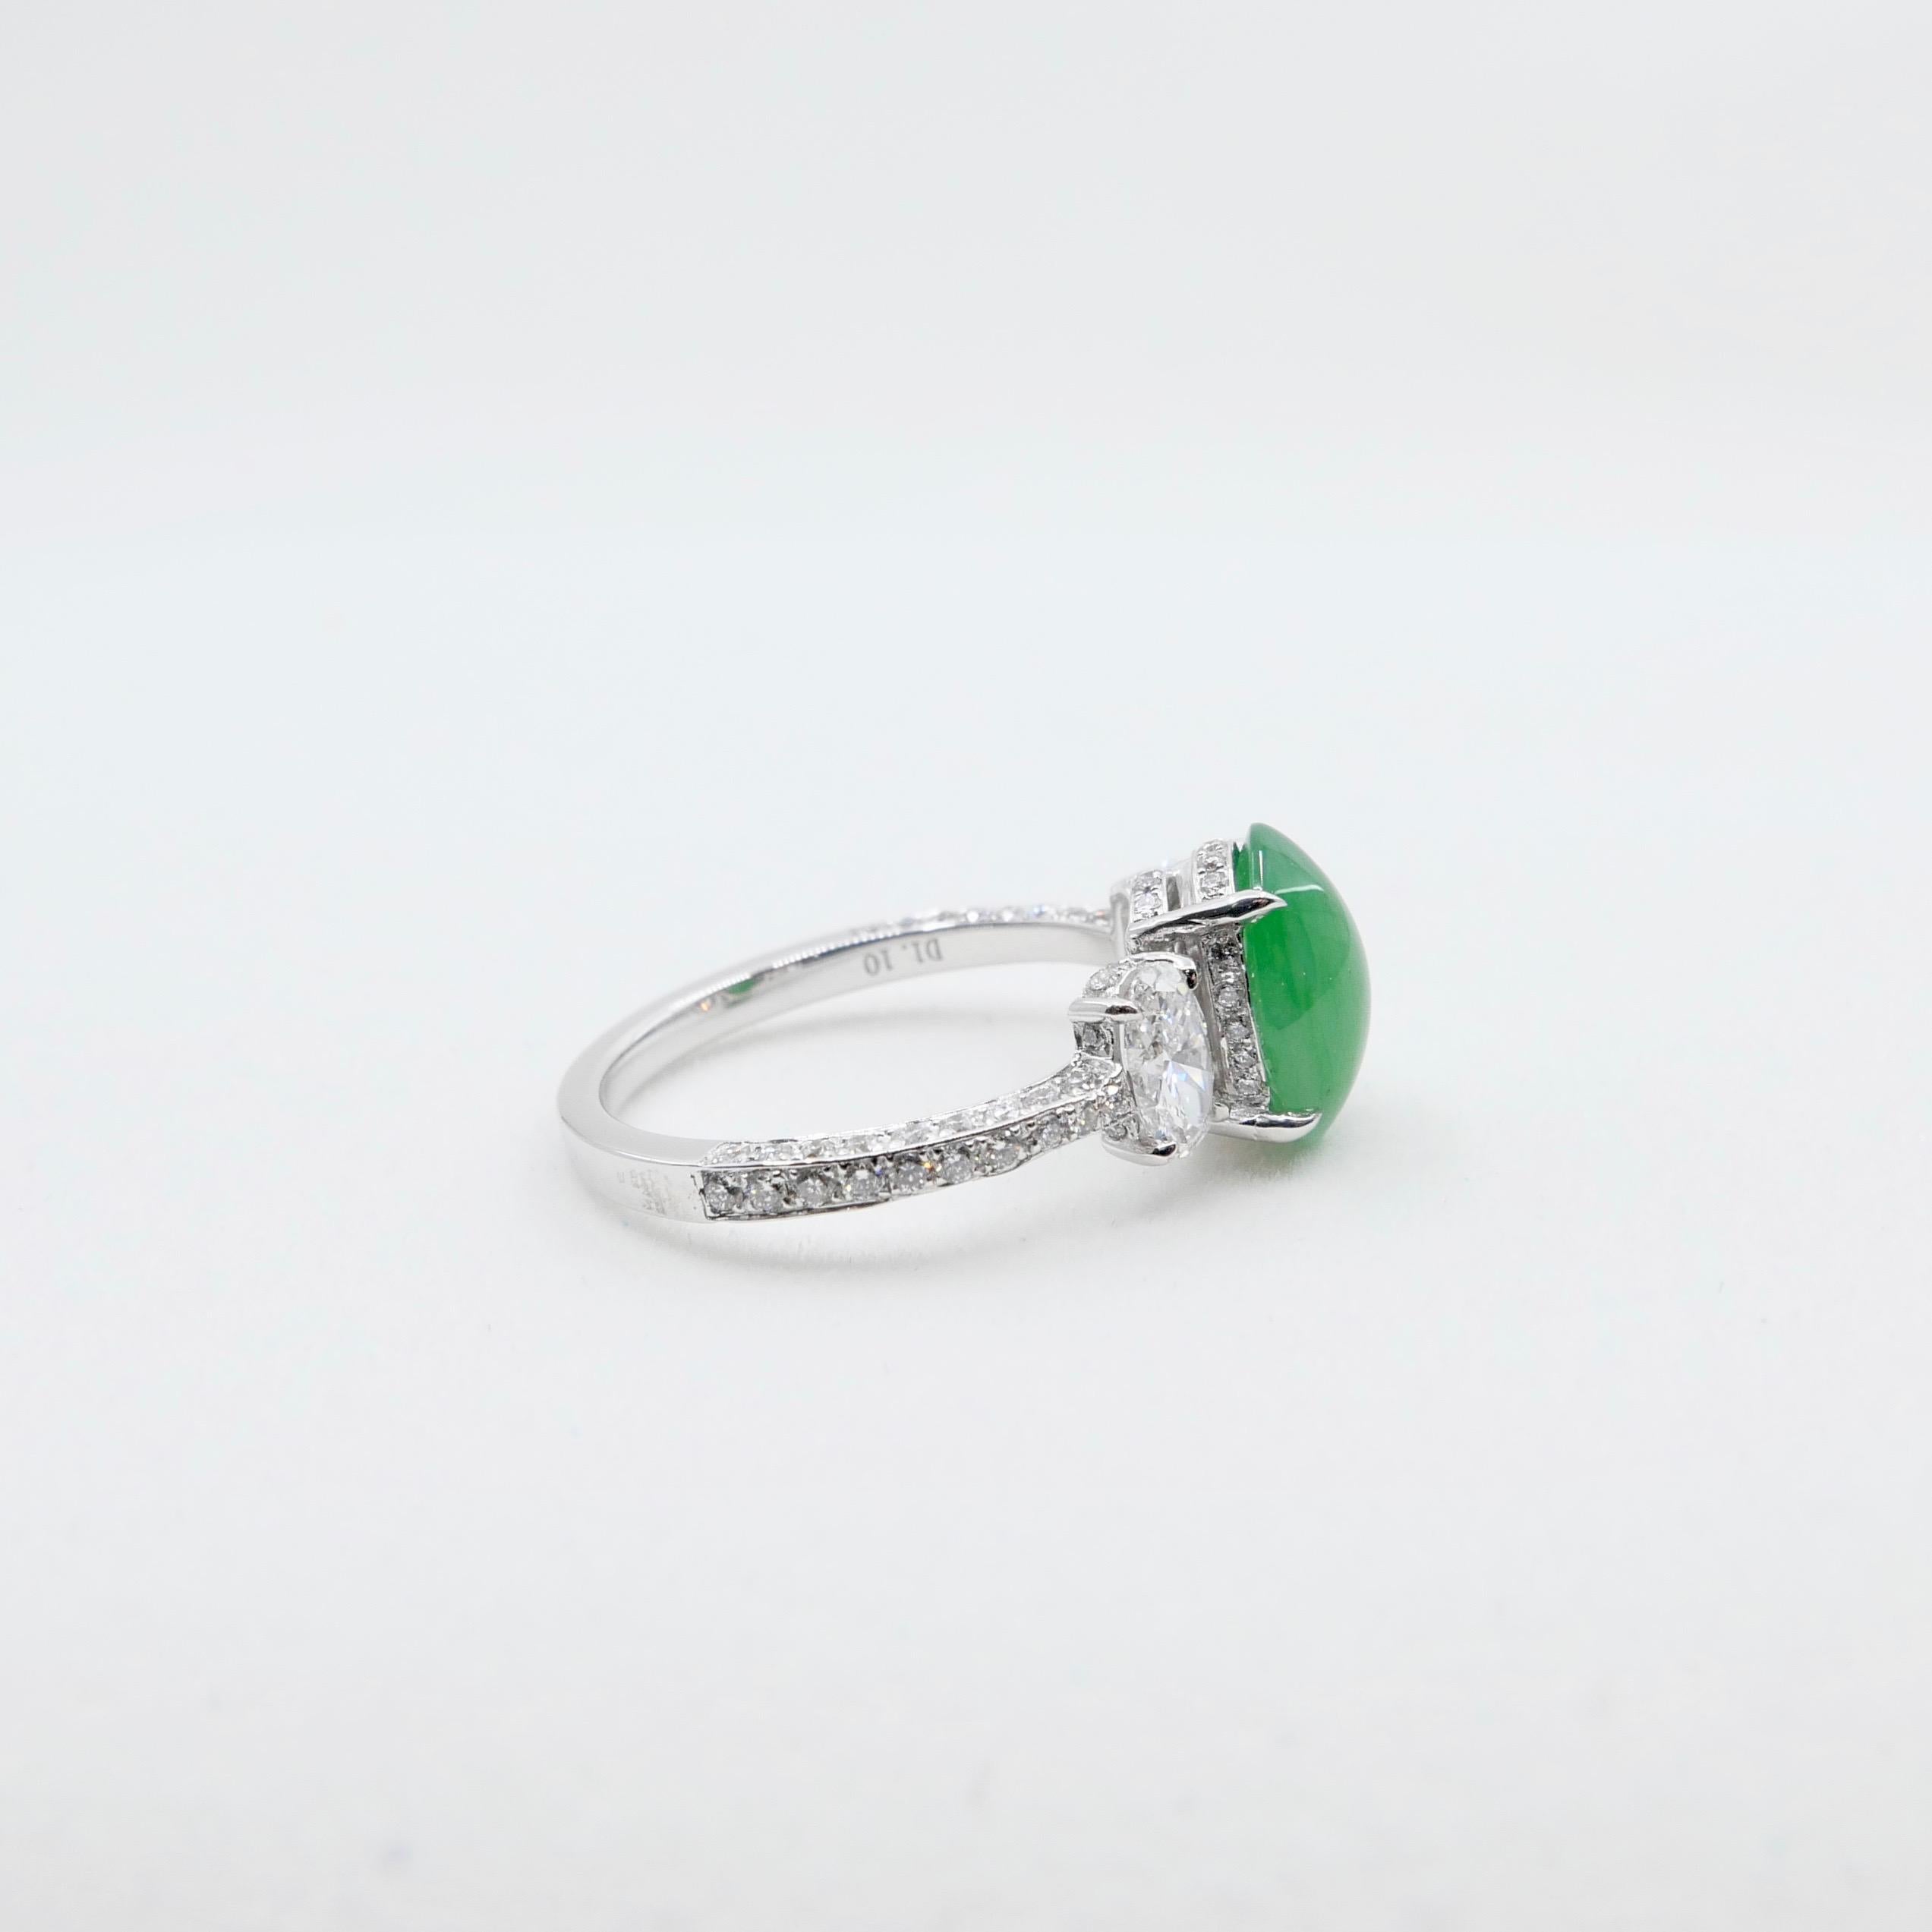 Certified 2.27 Cts Natural Jade & Oval Diamond Cocktail Ring, Apple Green Color For Sale 5